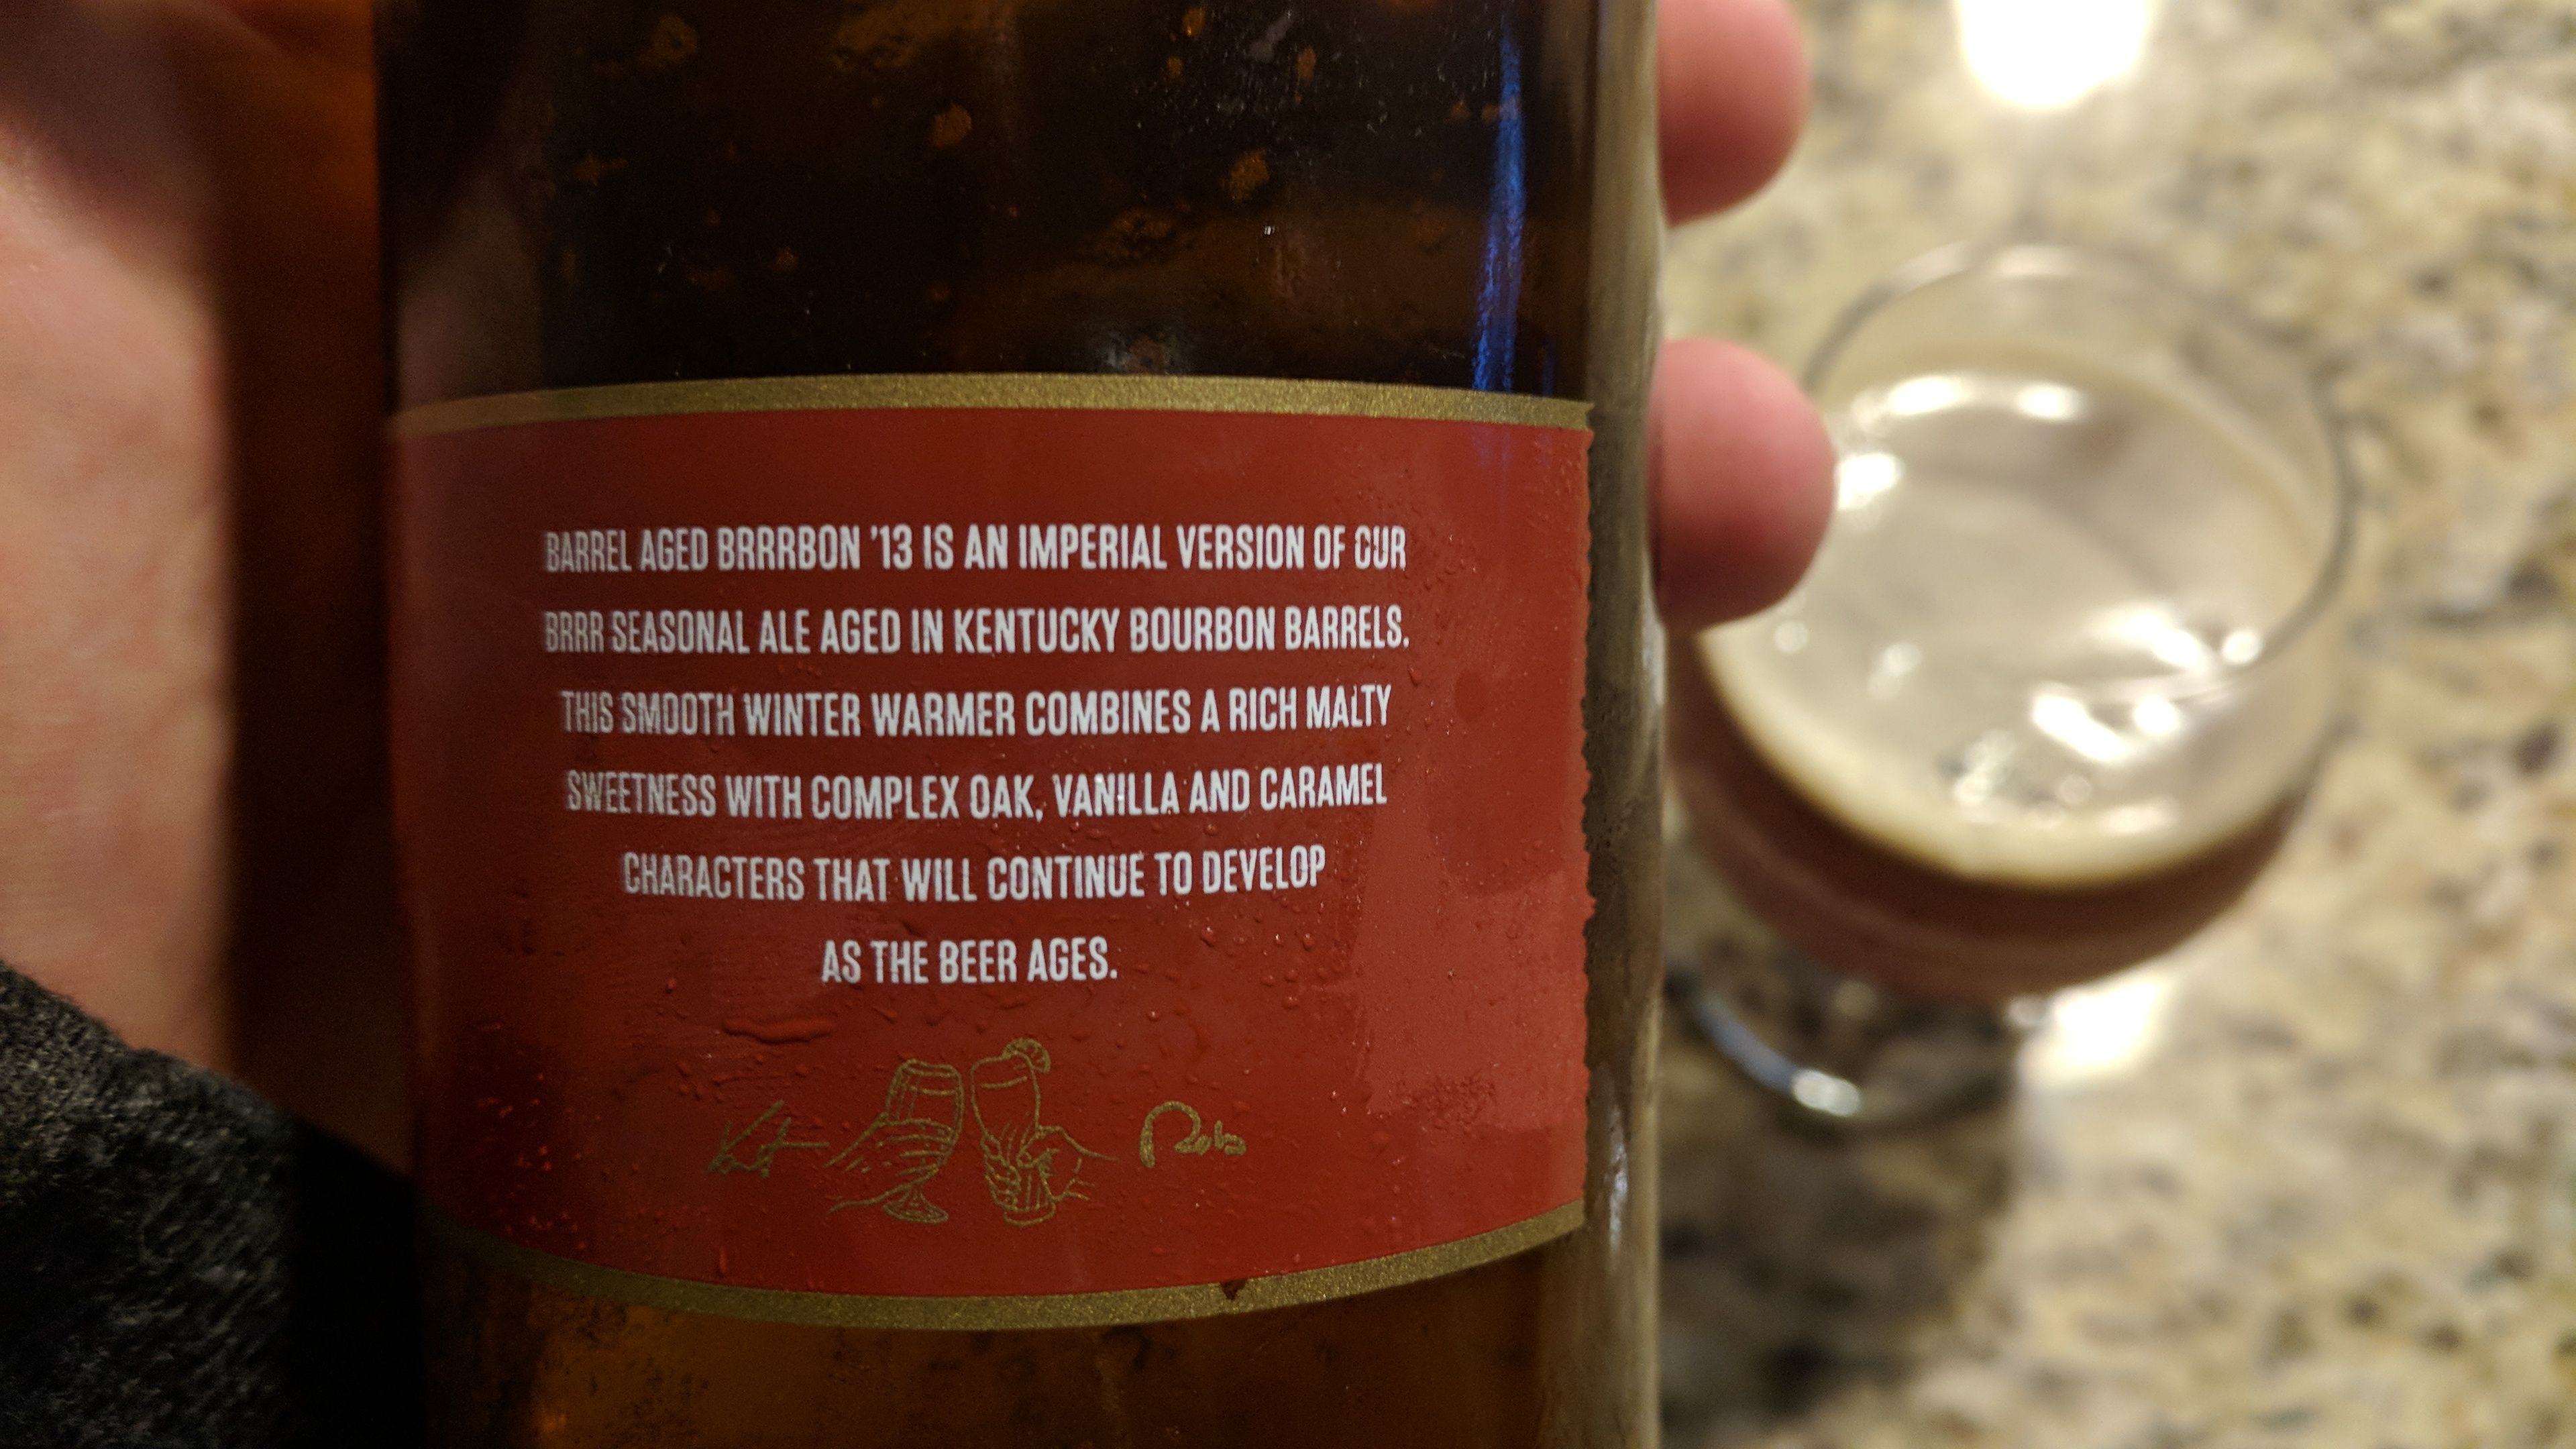 Description of the beer on the side label